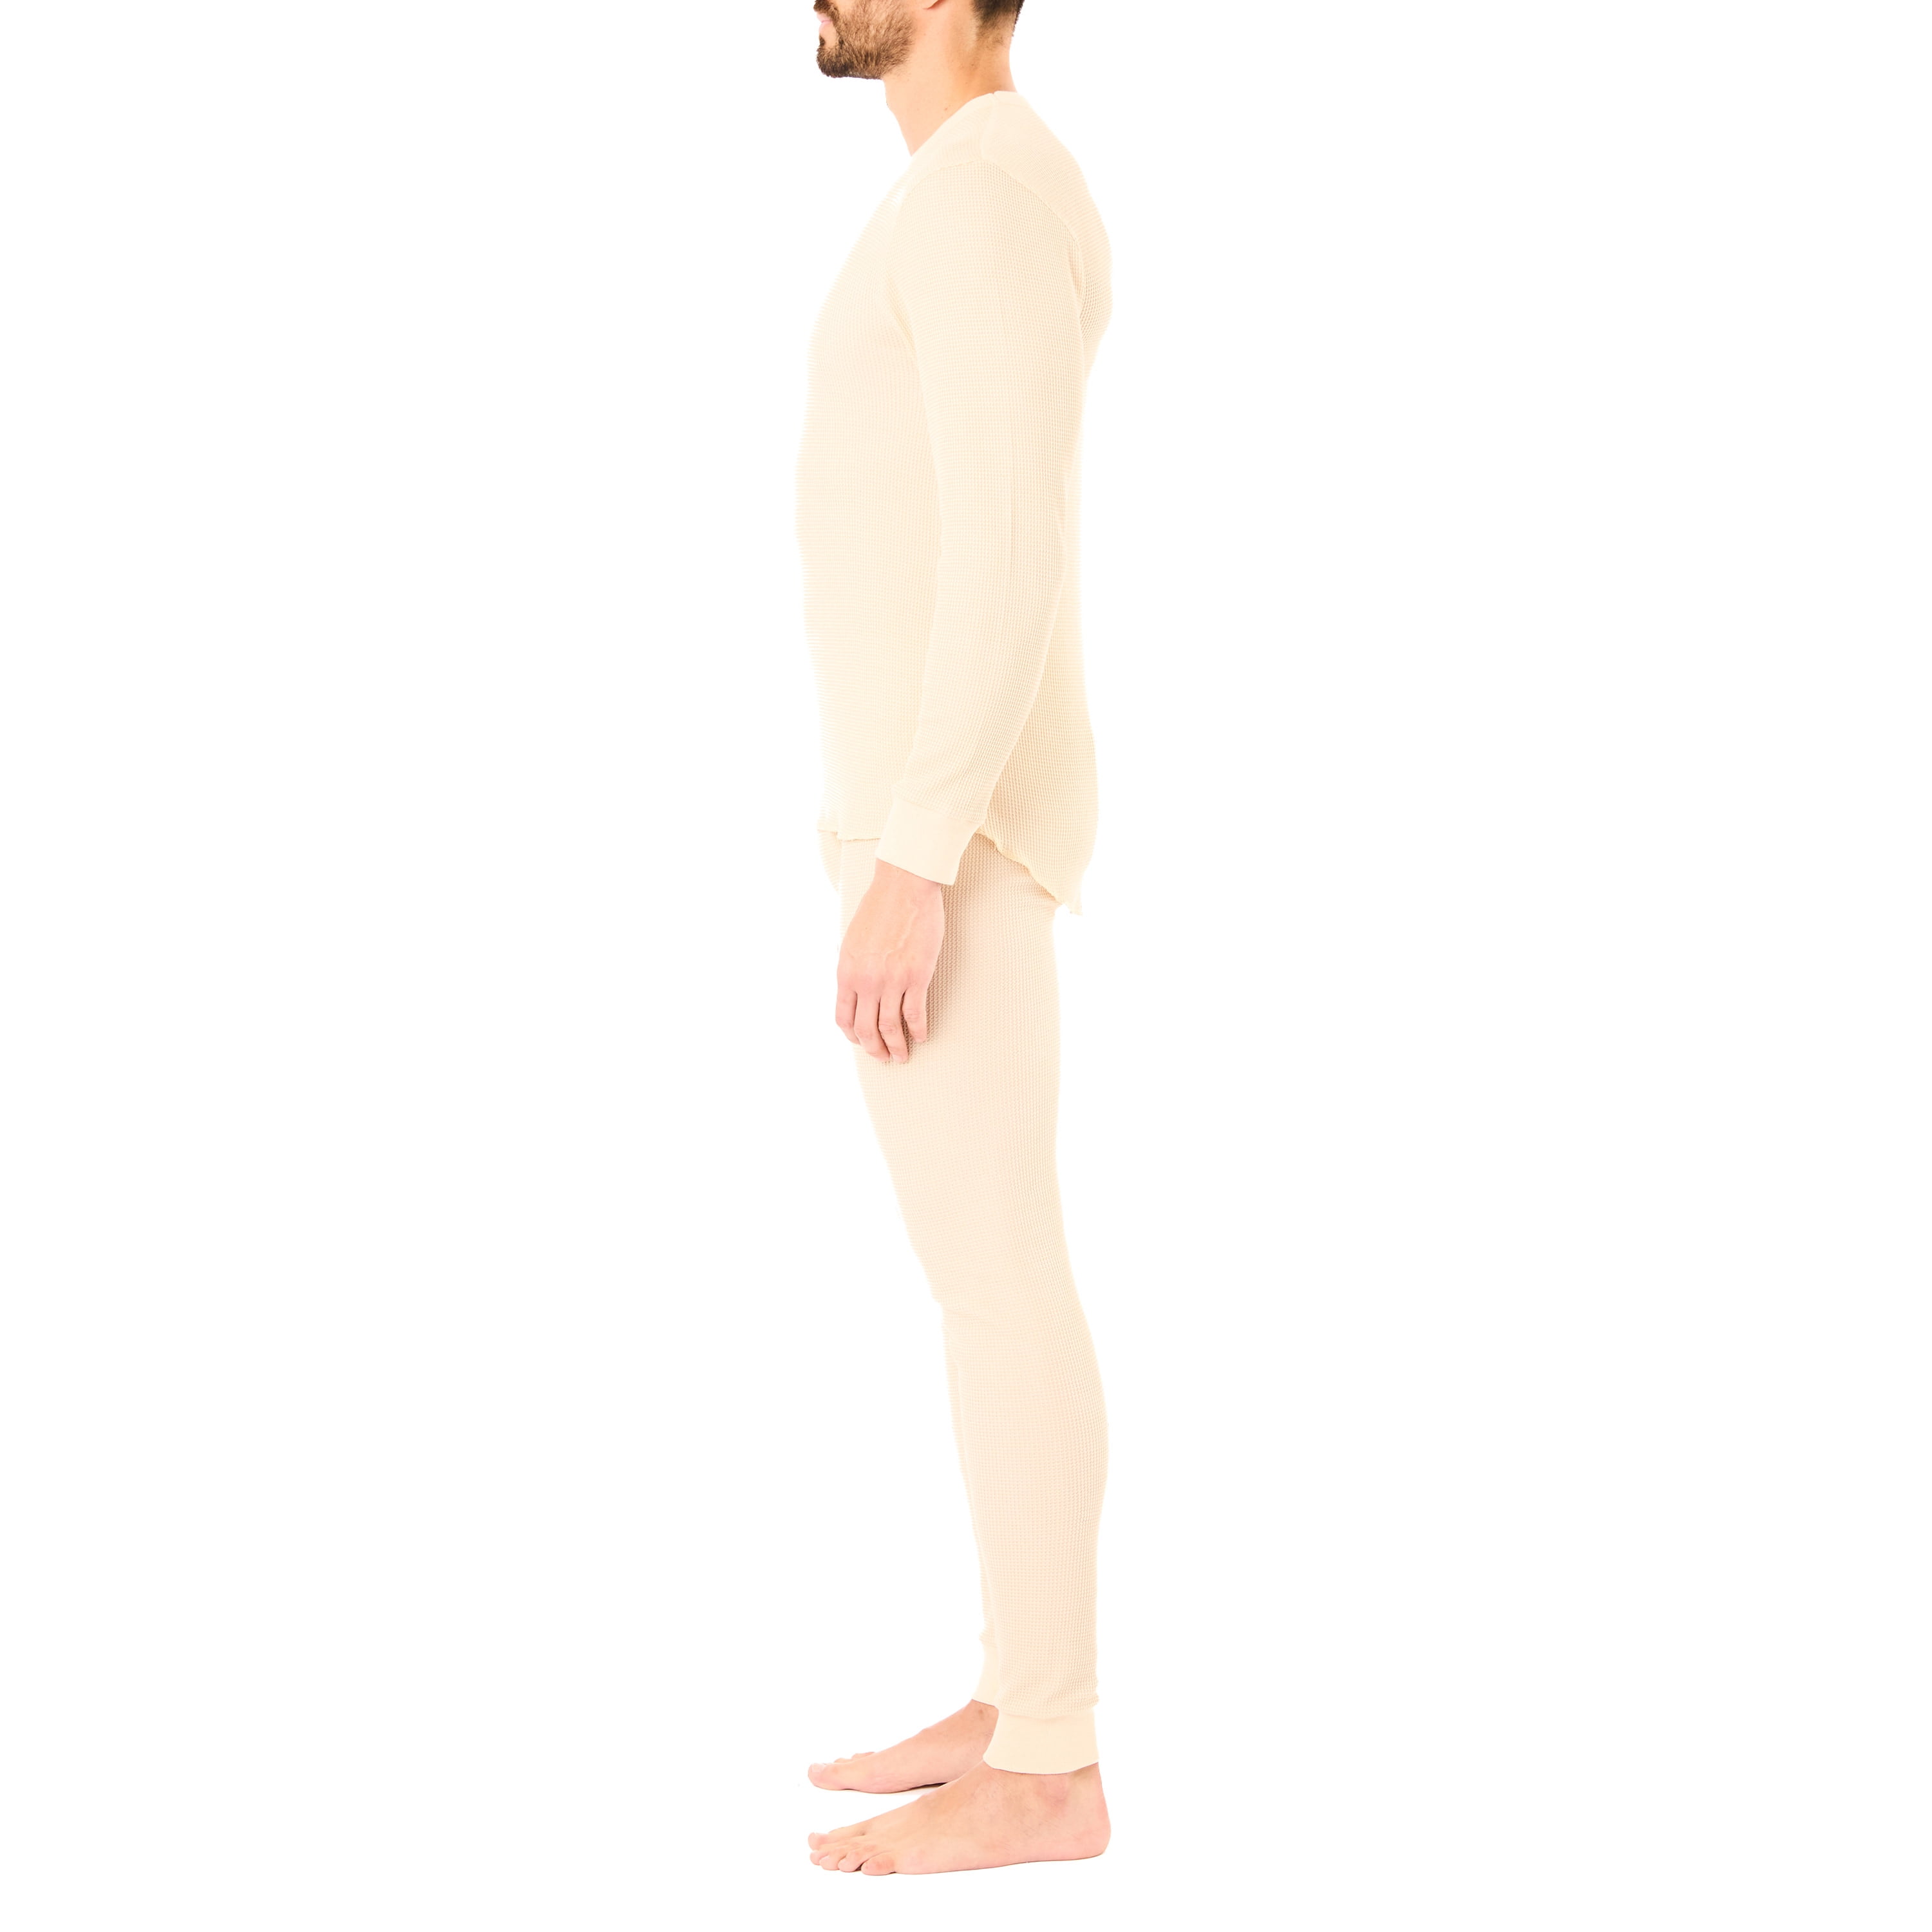 Smith's Workwear Thermal Long Underwear Set - Long Sleeve - Save 60%